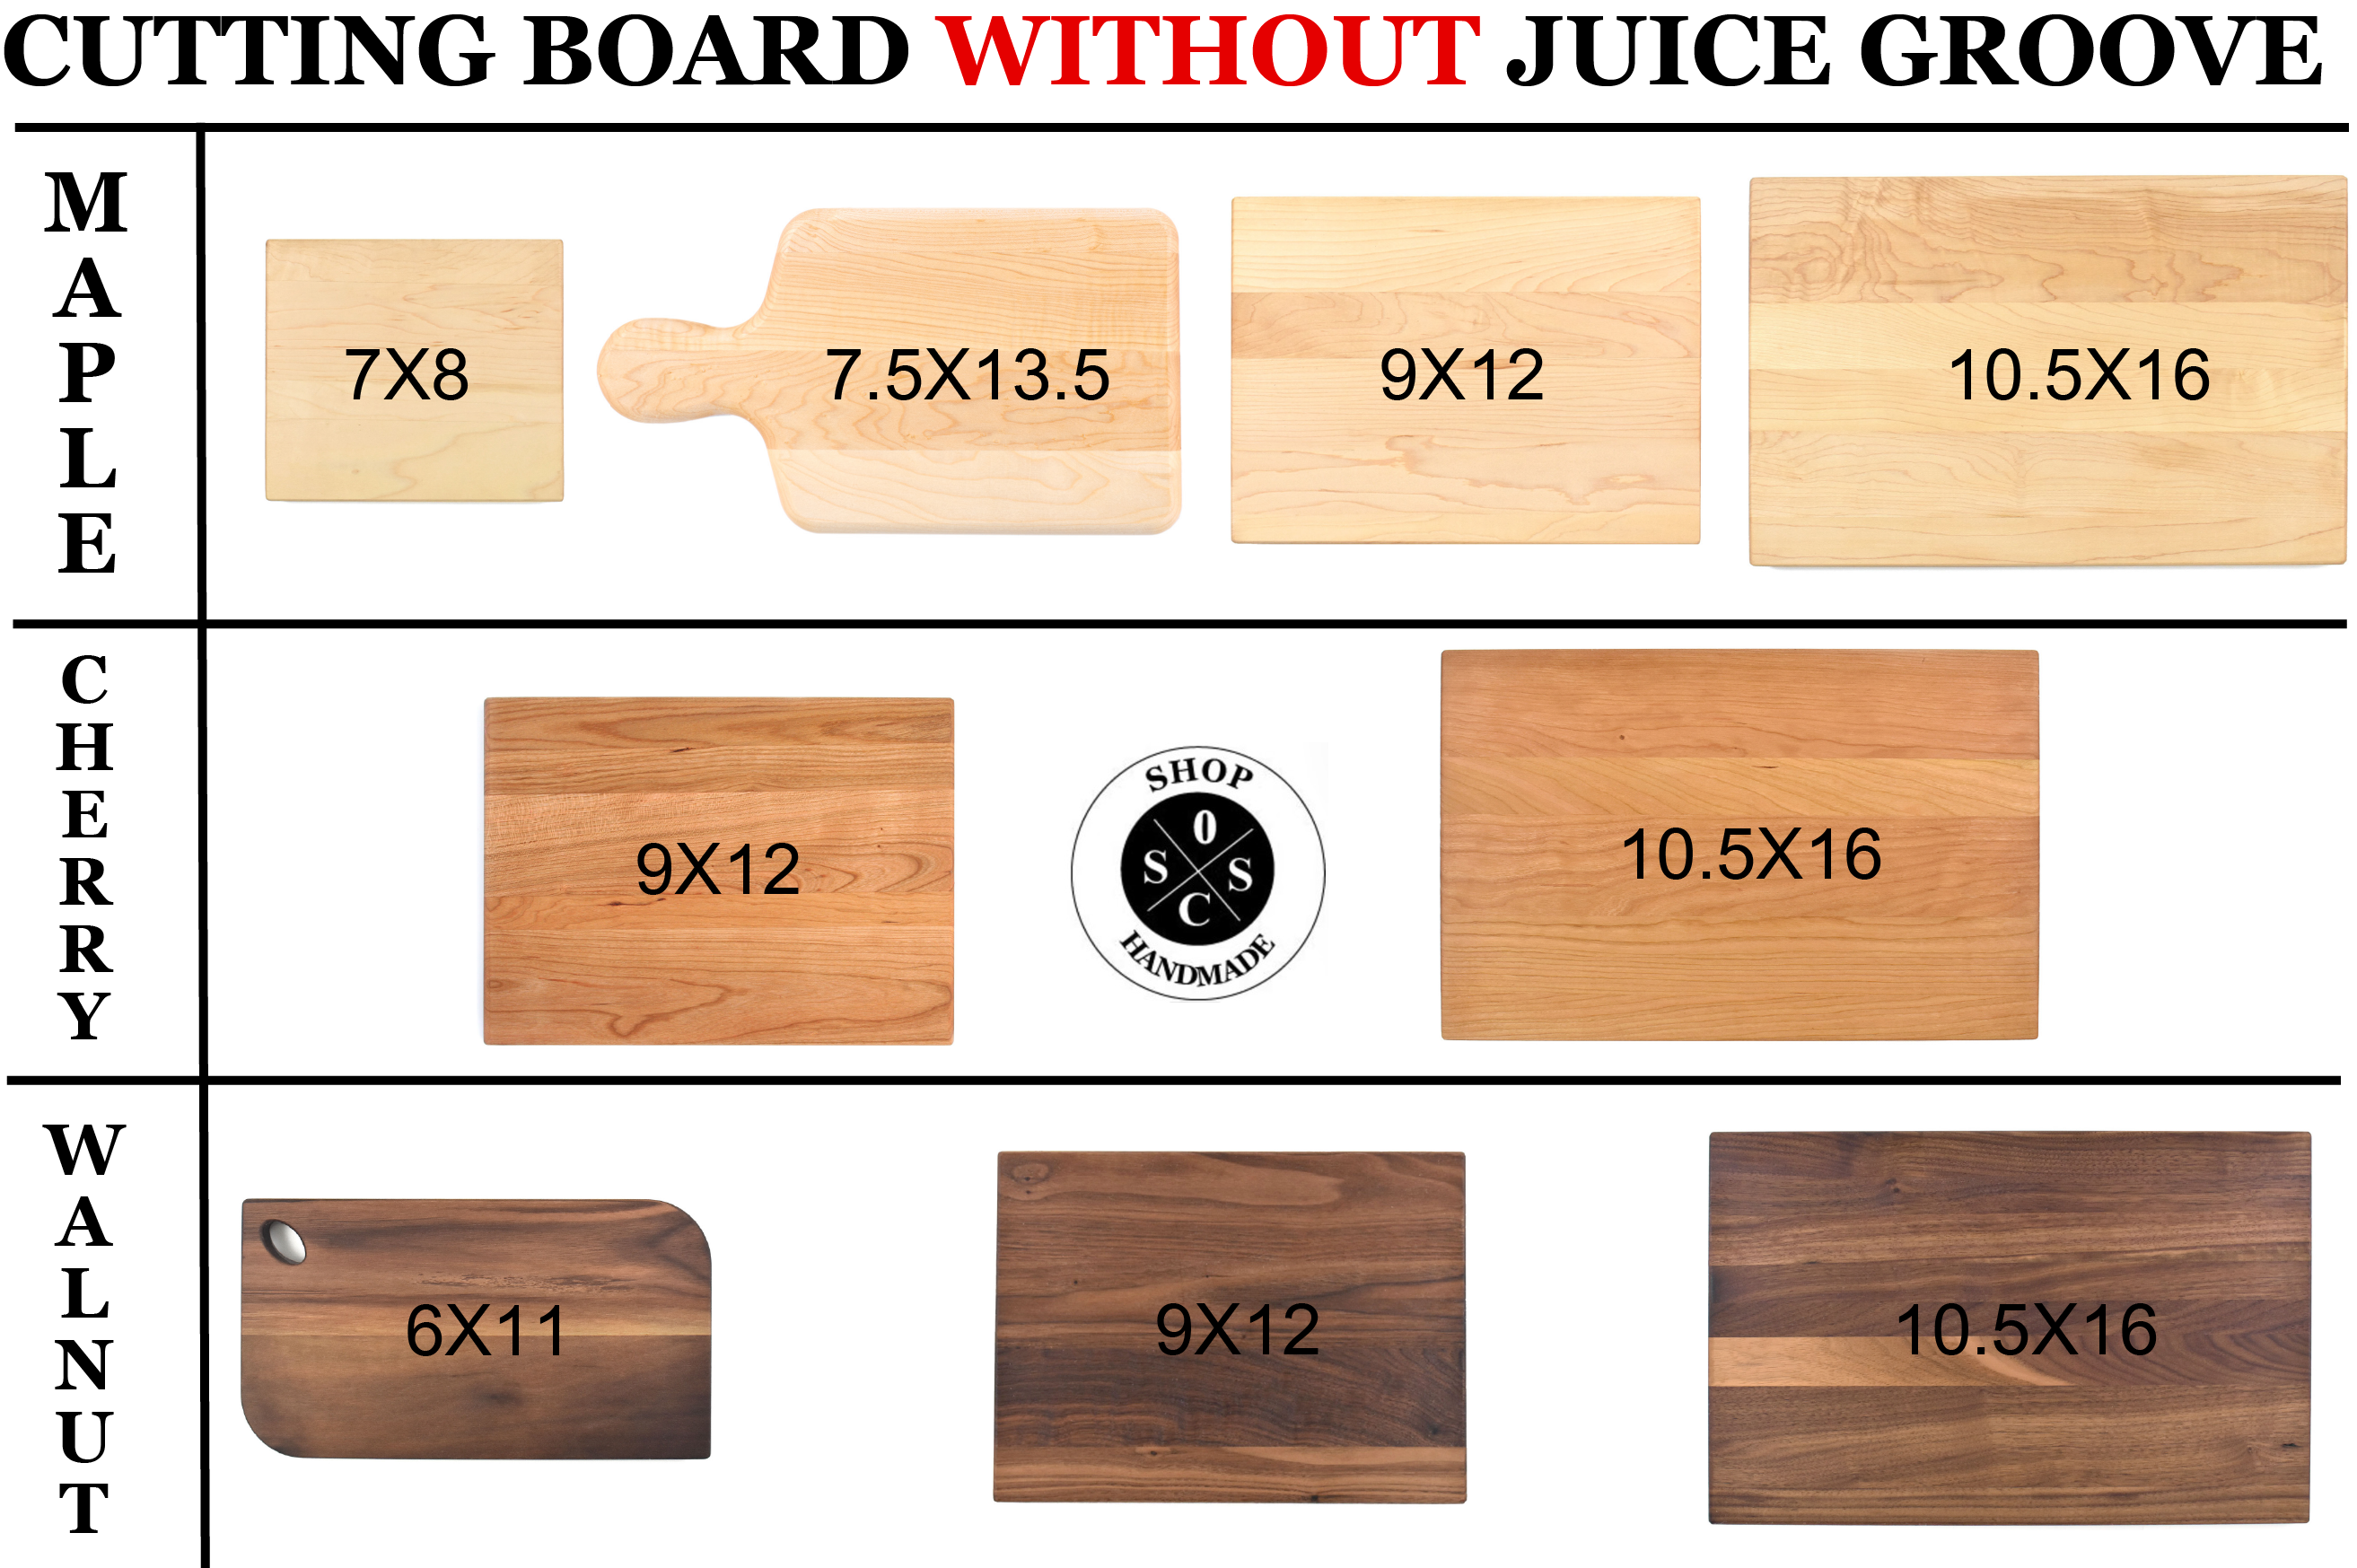 Personalized Cutting Board - Engraved Cutting Board, Custom Cutting Board, Wedding Gift, Closing Gift. Housewarming Gift, Anniversary Gift 2